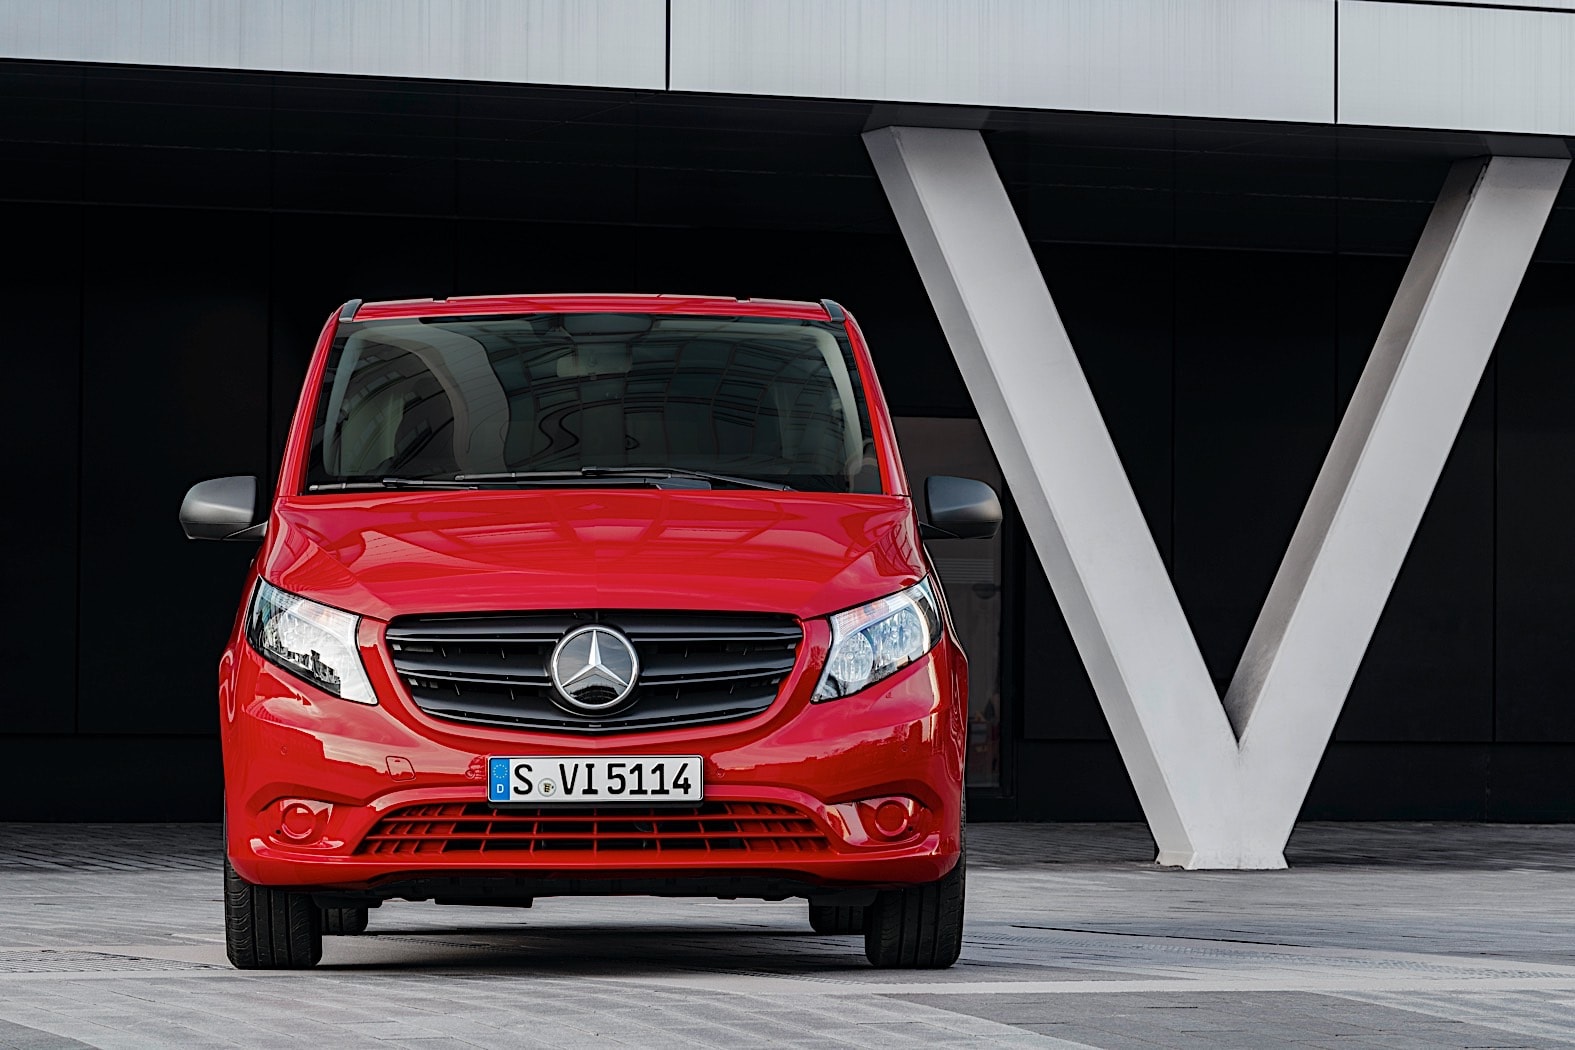 The Mercedes-Benz Vito Is Getting Another Facelift, Albeit a More